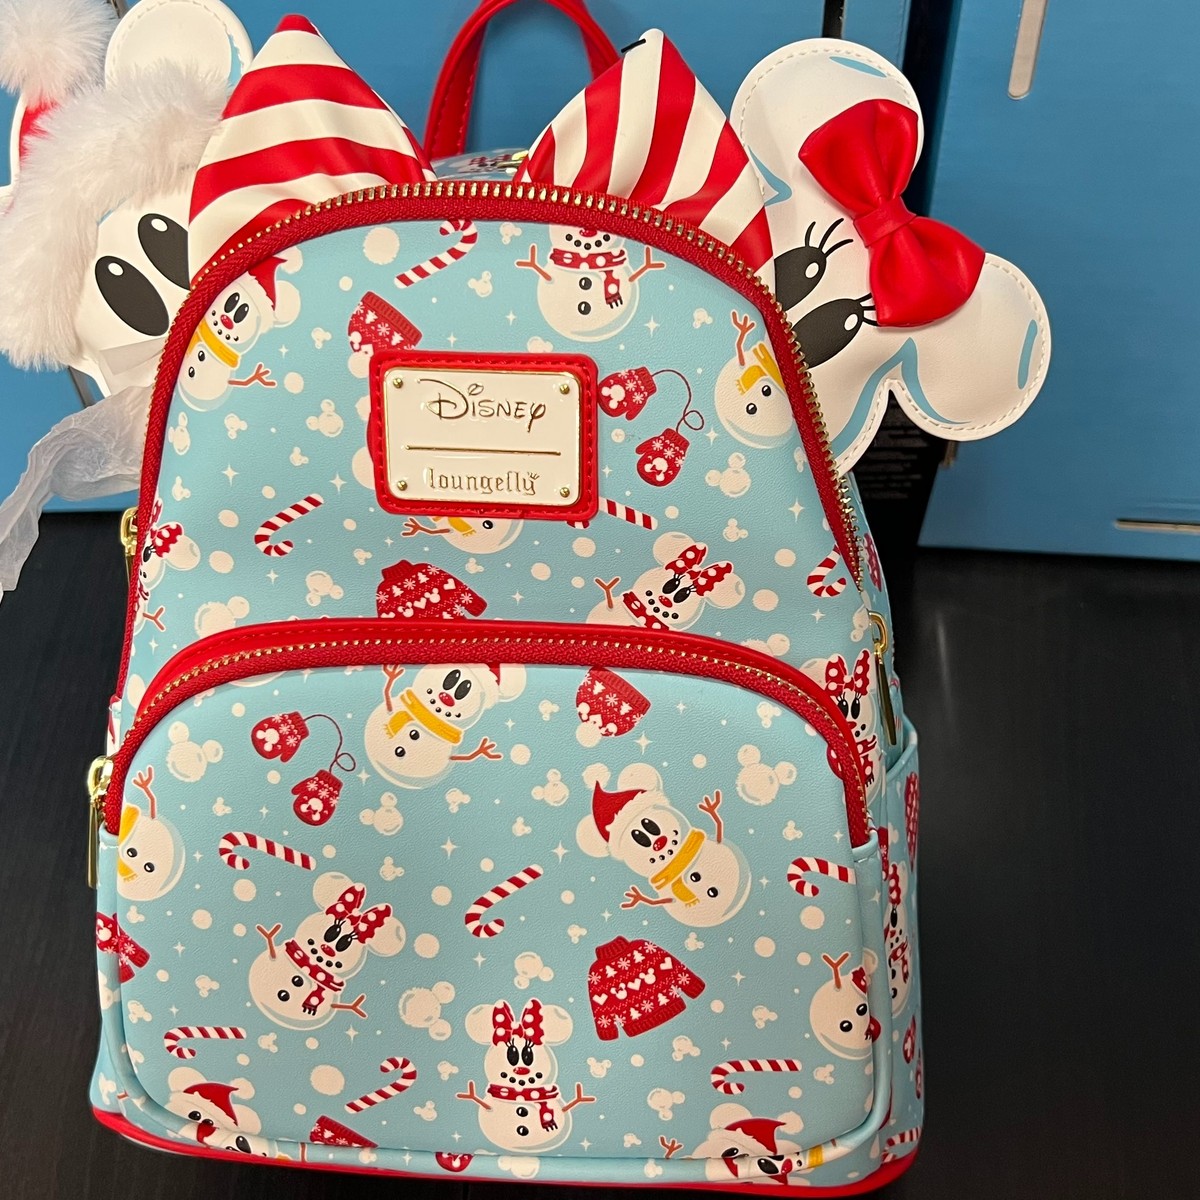 Loungefly Disney Minnie Mouse Patch Saddle Bag